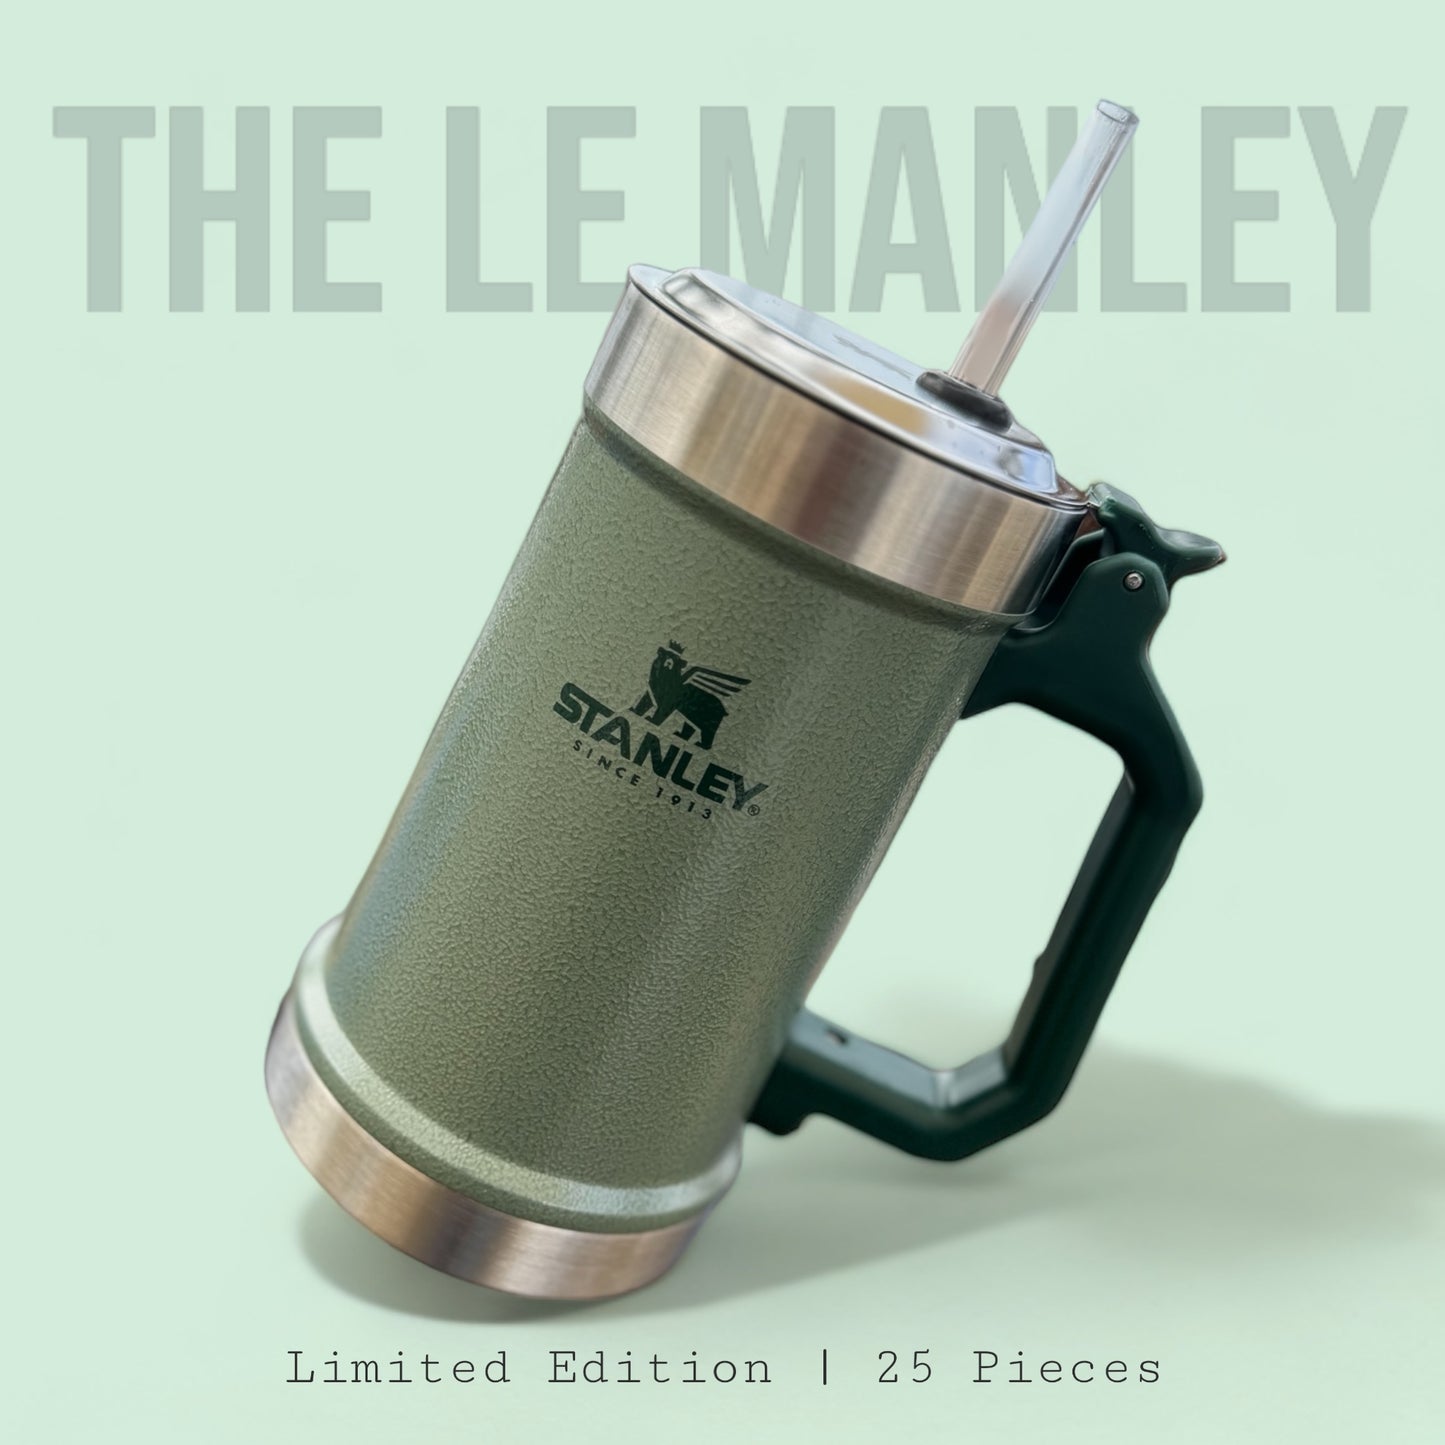 The LE Manley – Limited Edition